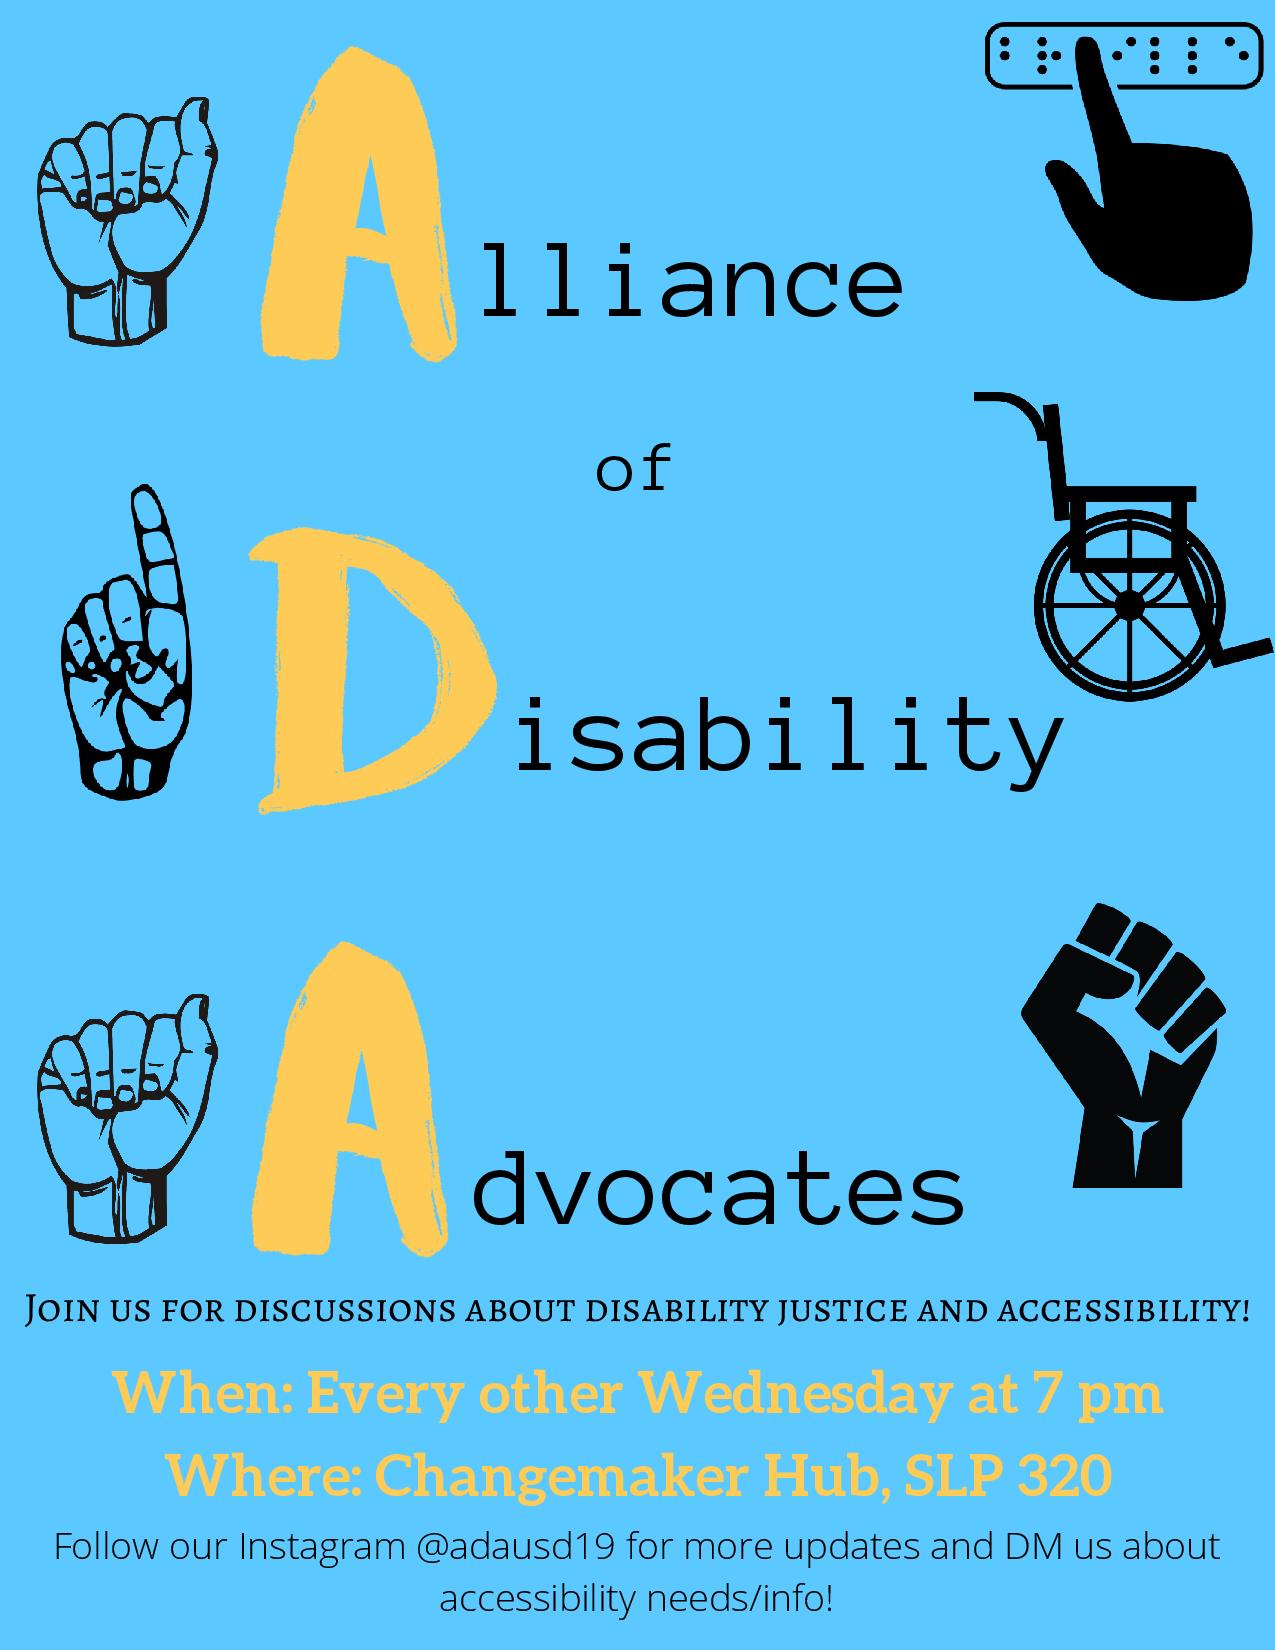 The purpose of this organization is to foster an inclusive and safe environment for people with disabilities and allies without disabilities.